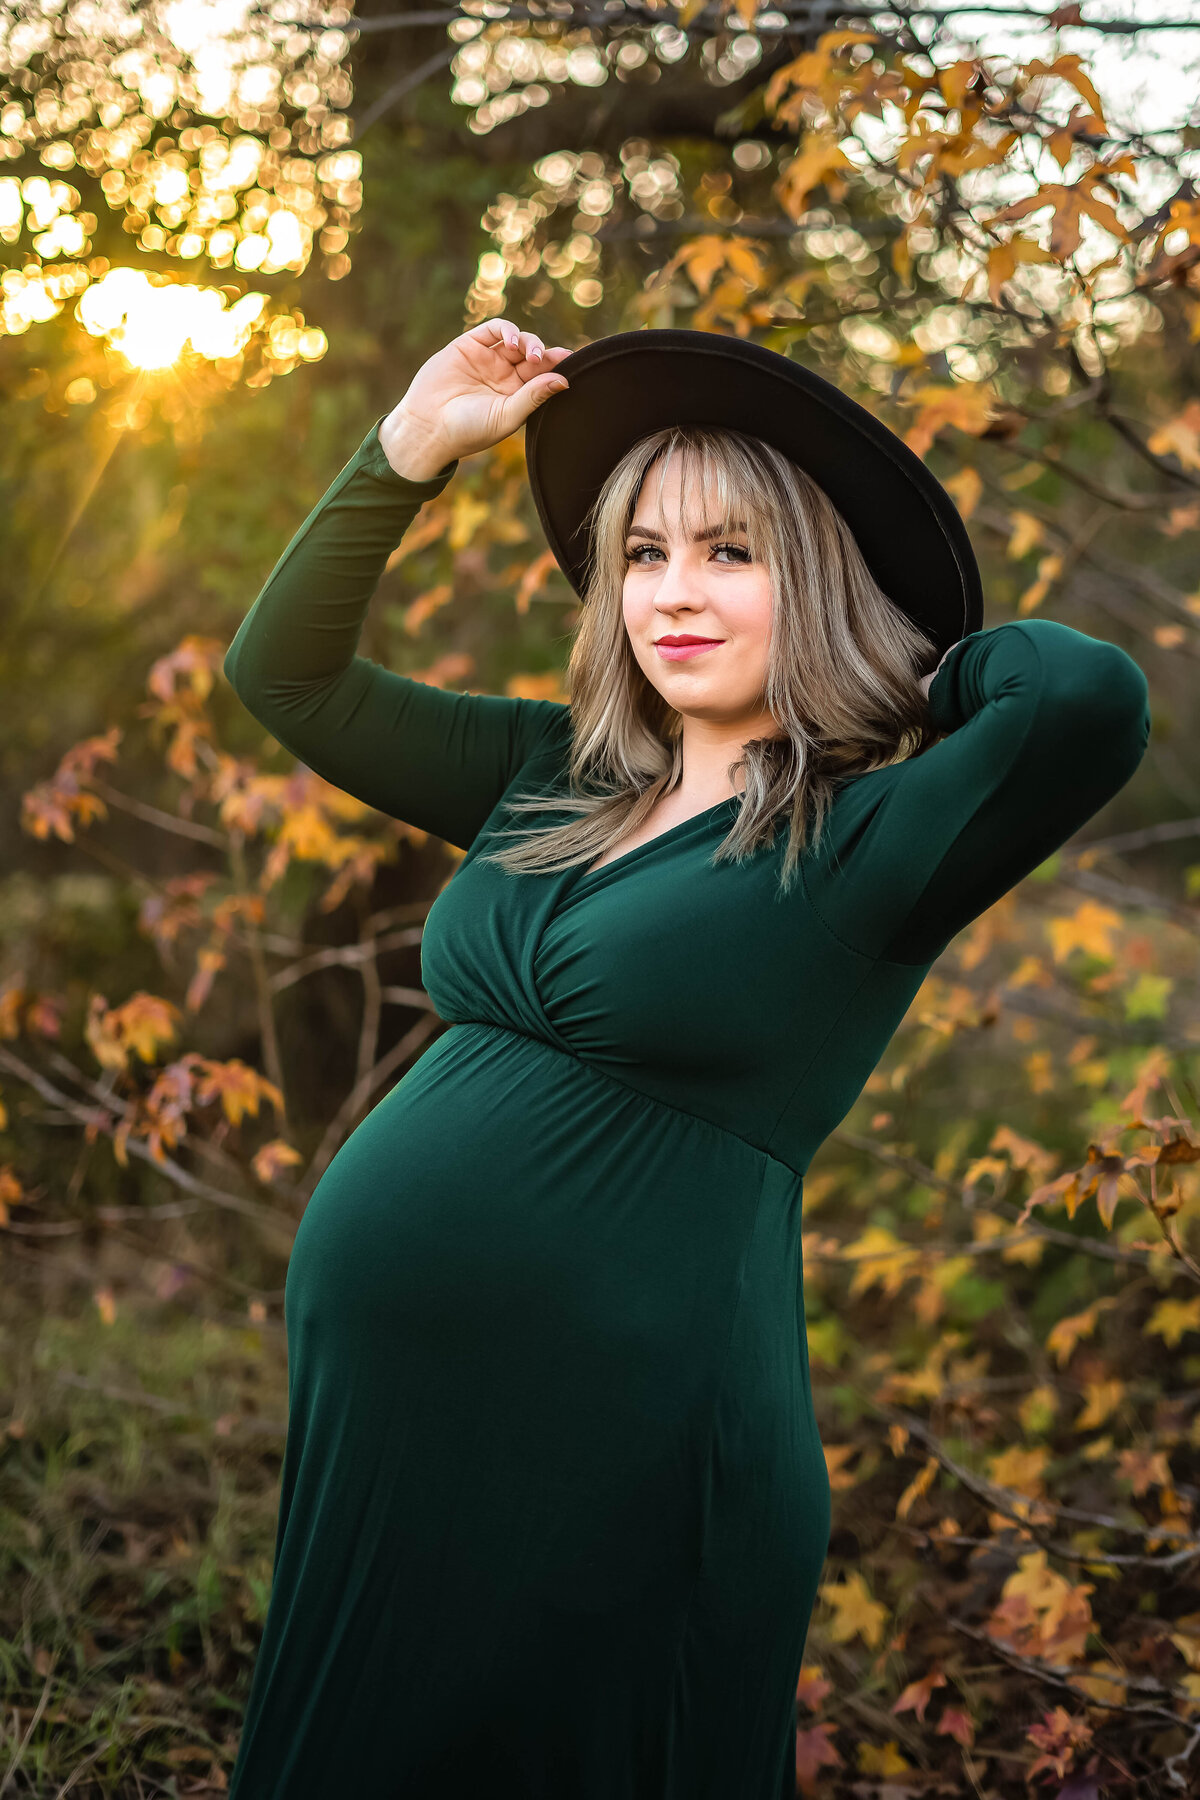 Pregnant woman in a long green dress at sunset during the fall season holding a hat